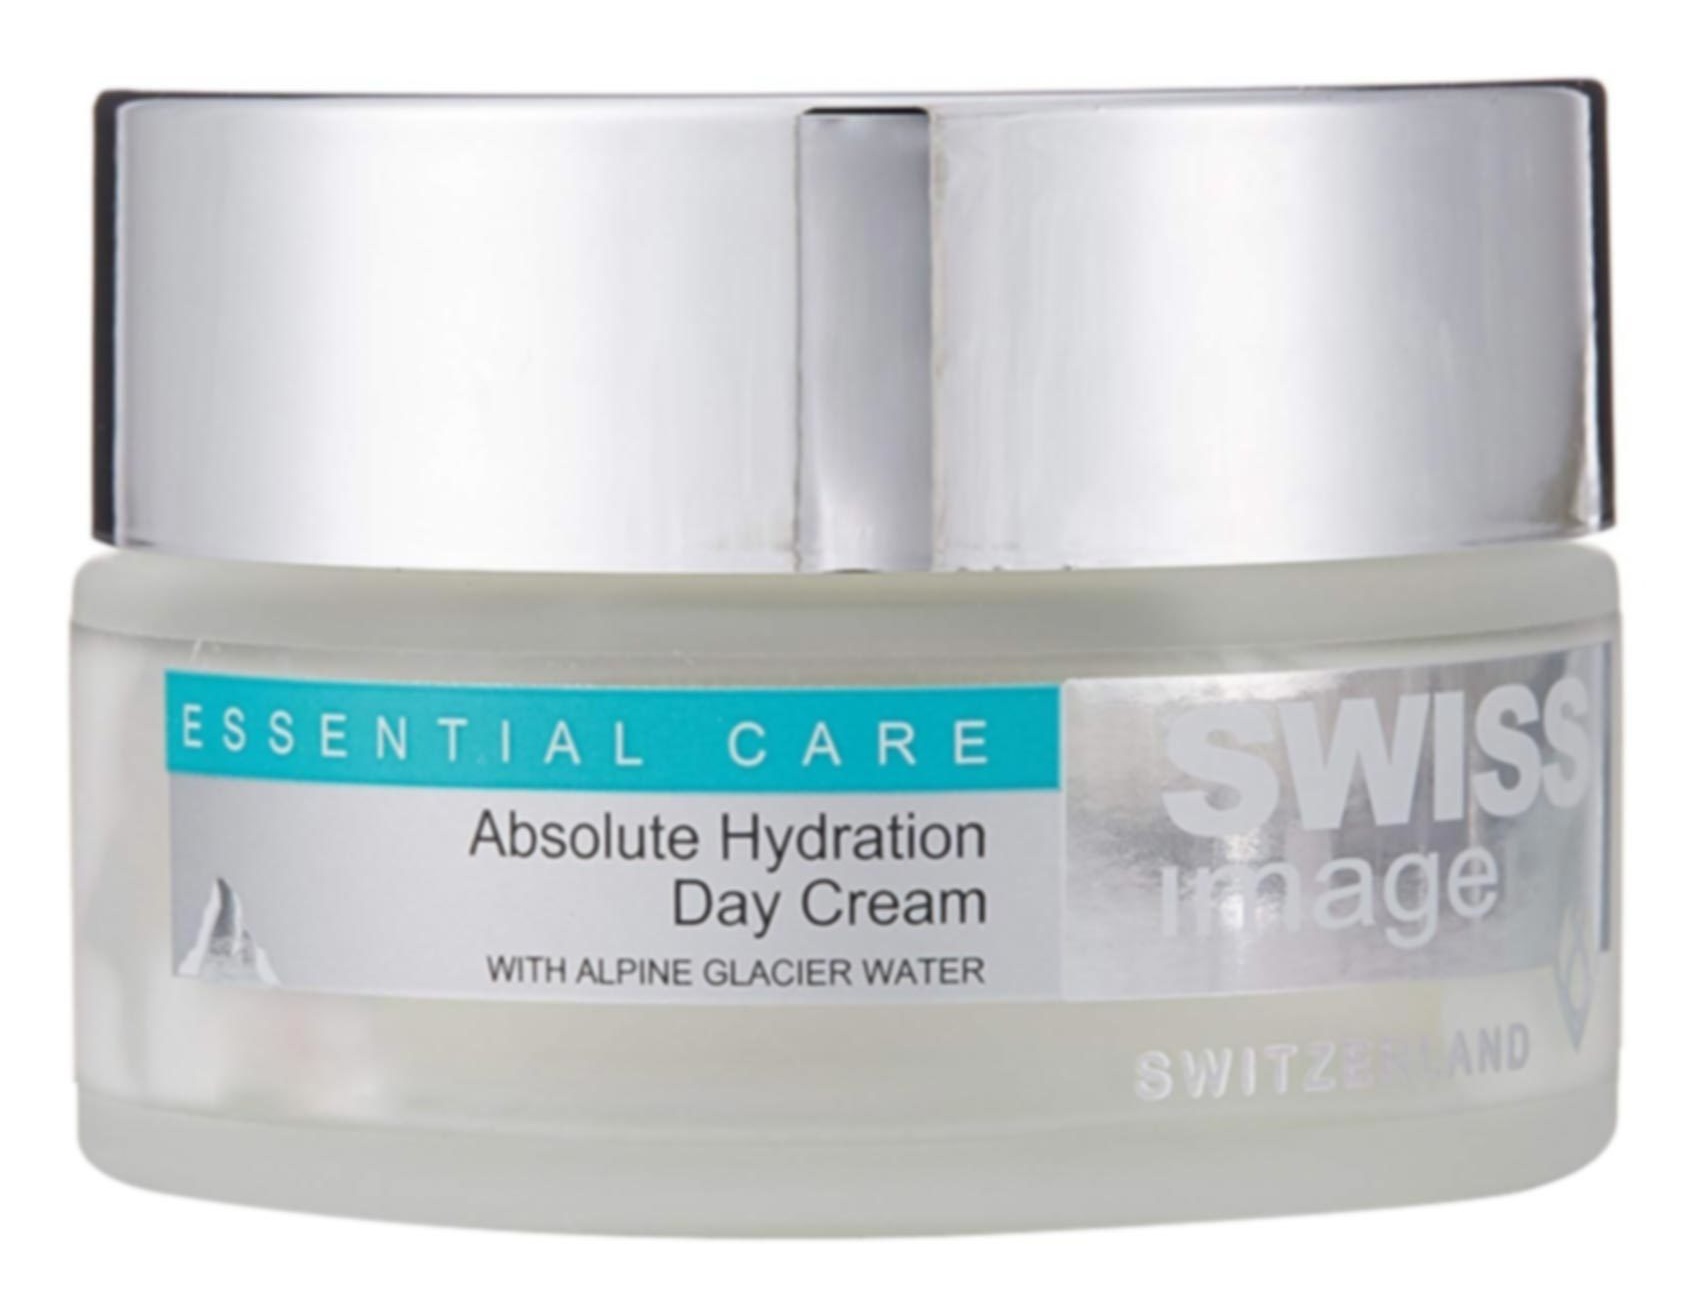 Swiss Image Switzerland Essential Care Absolute Hydration Day Cream